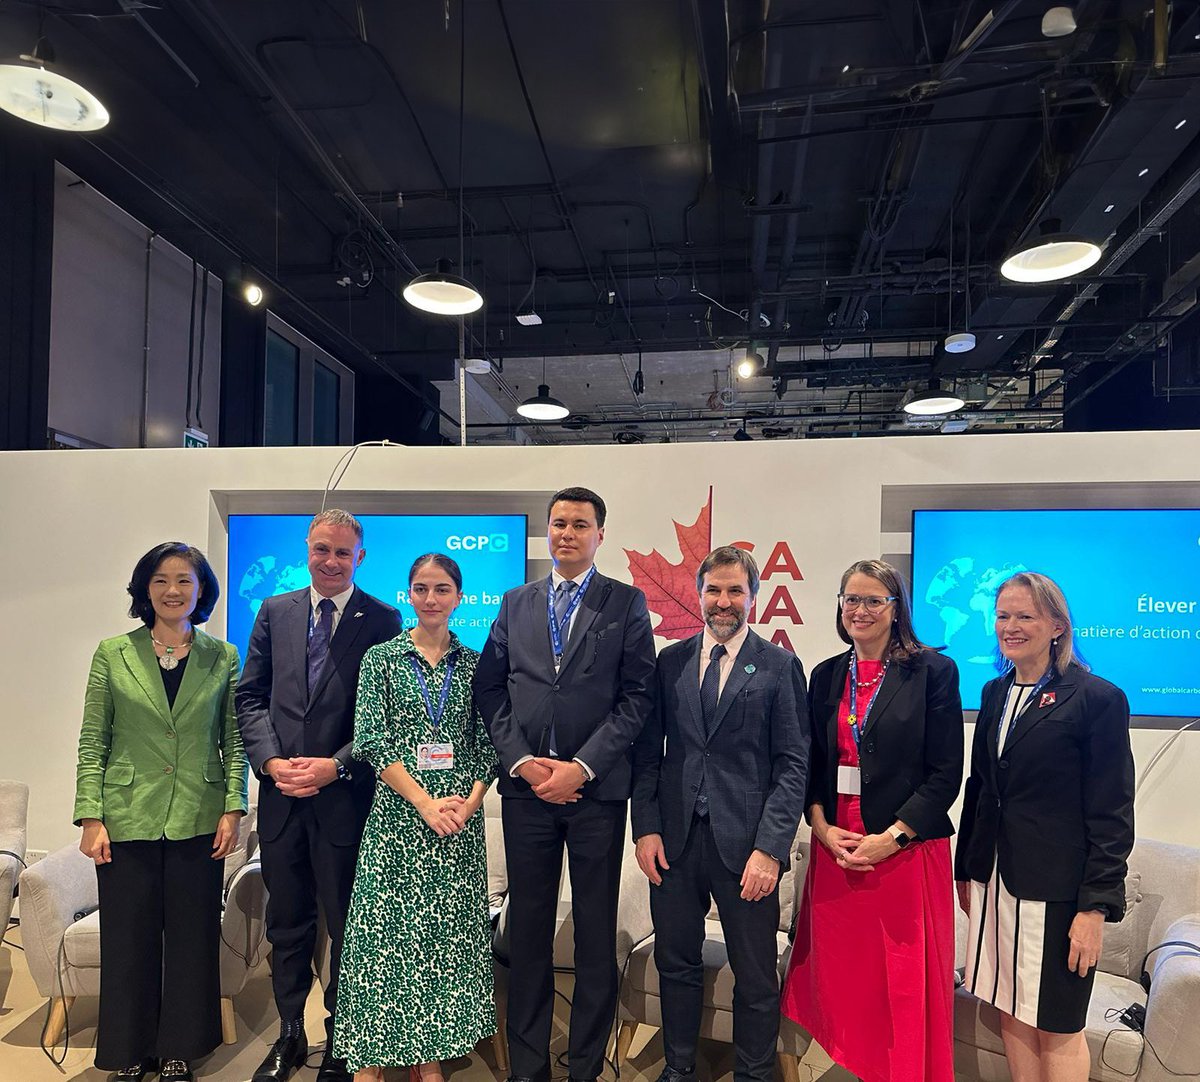 Pleased to moderate a high-level discussion, hosted by Canada, on the @GCPChallenge — which focuses on expanding the volume of emissions covered by a carbon price. Carbon pricing is an important policy lever that can help drive emissions reductions.